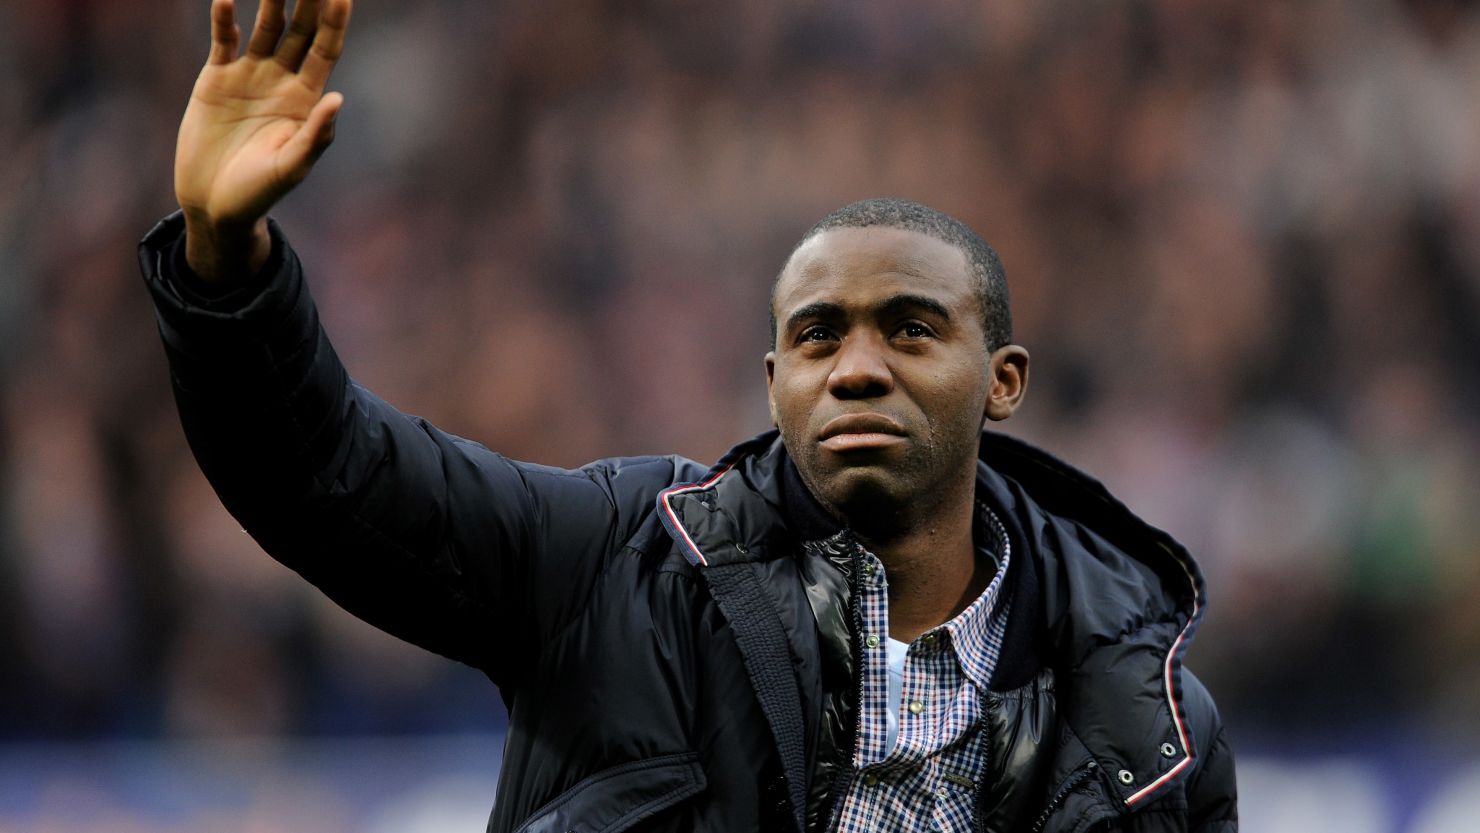 Fabrice Muamba waves to the crowd during his emotional appearance at the Reebok before Bolton's game against Tottenham.